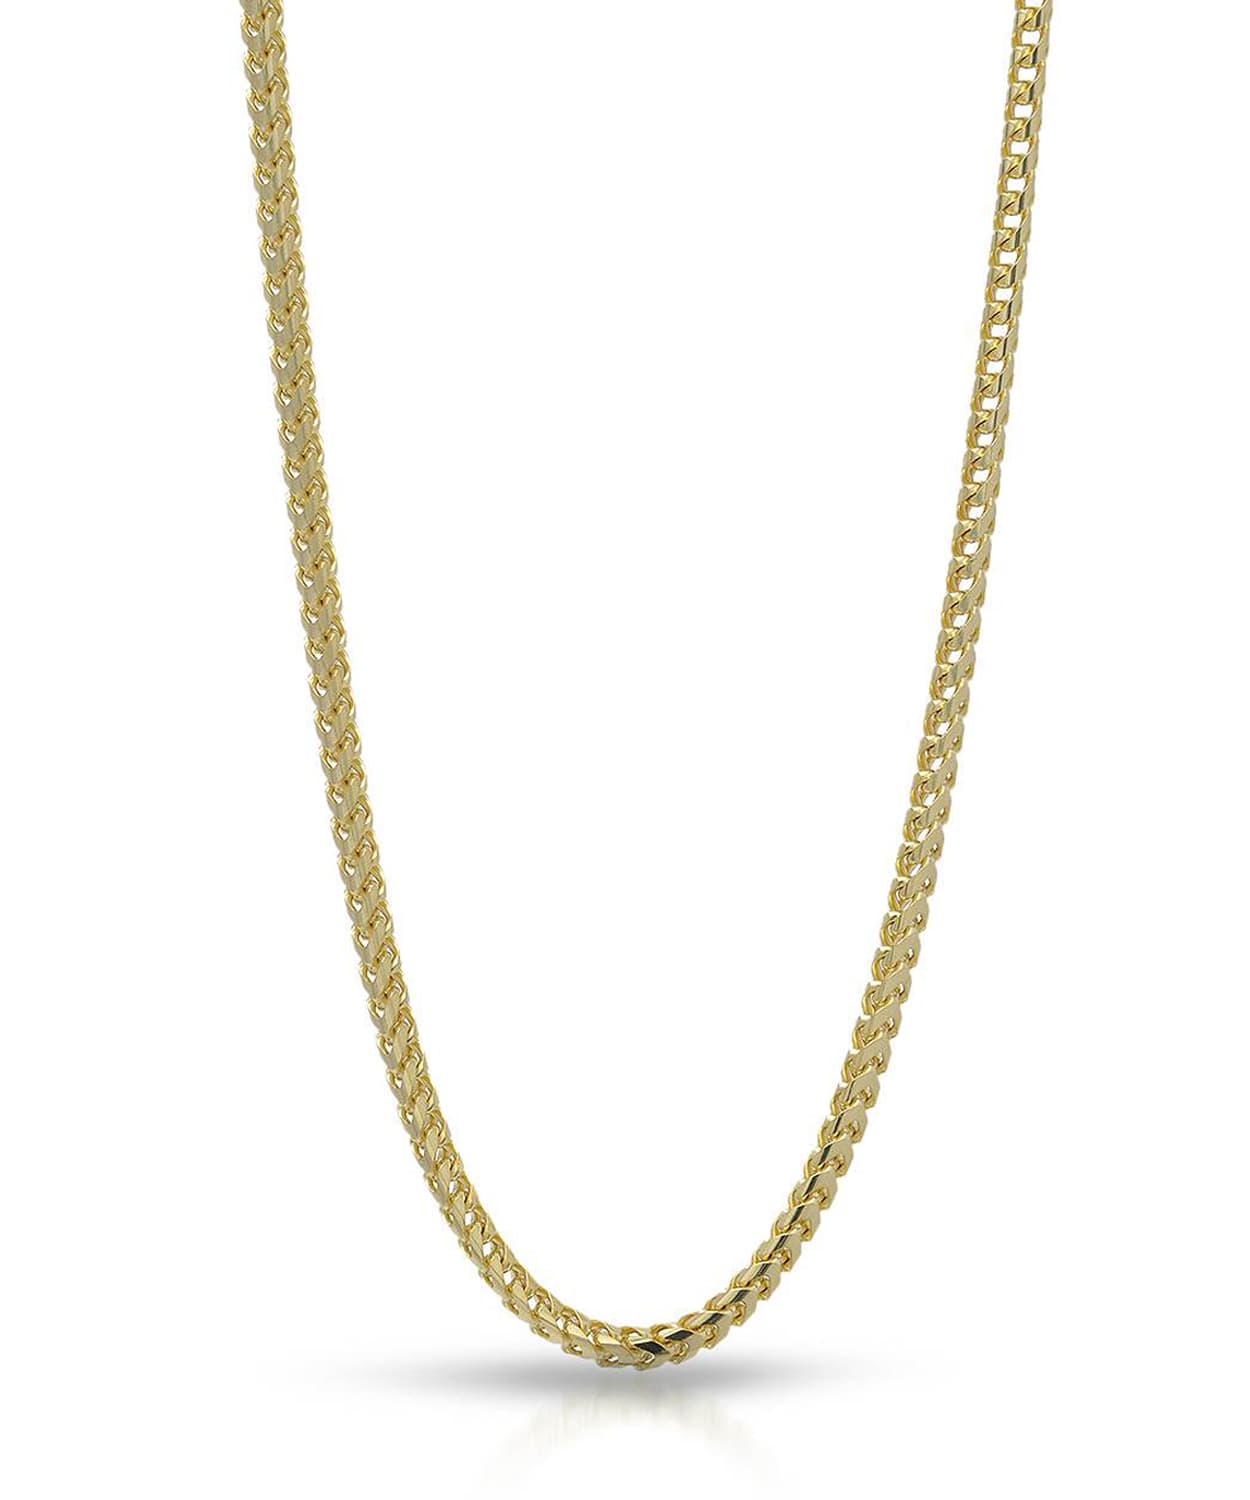 2mm 14k Yellow Gold Franco Chain View 1